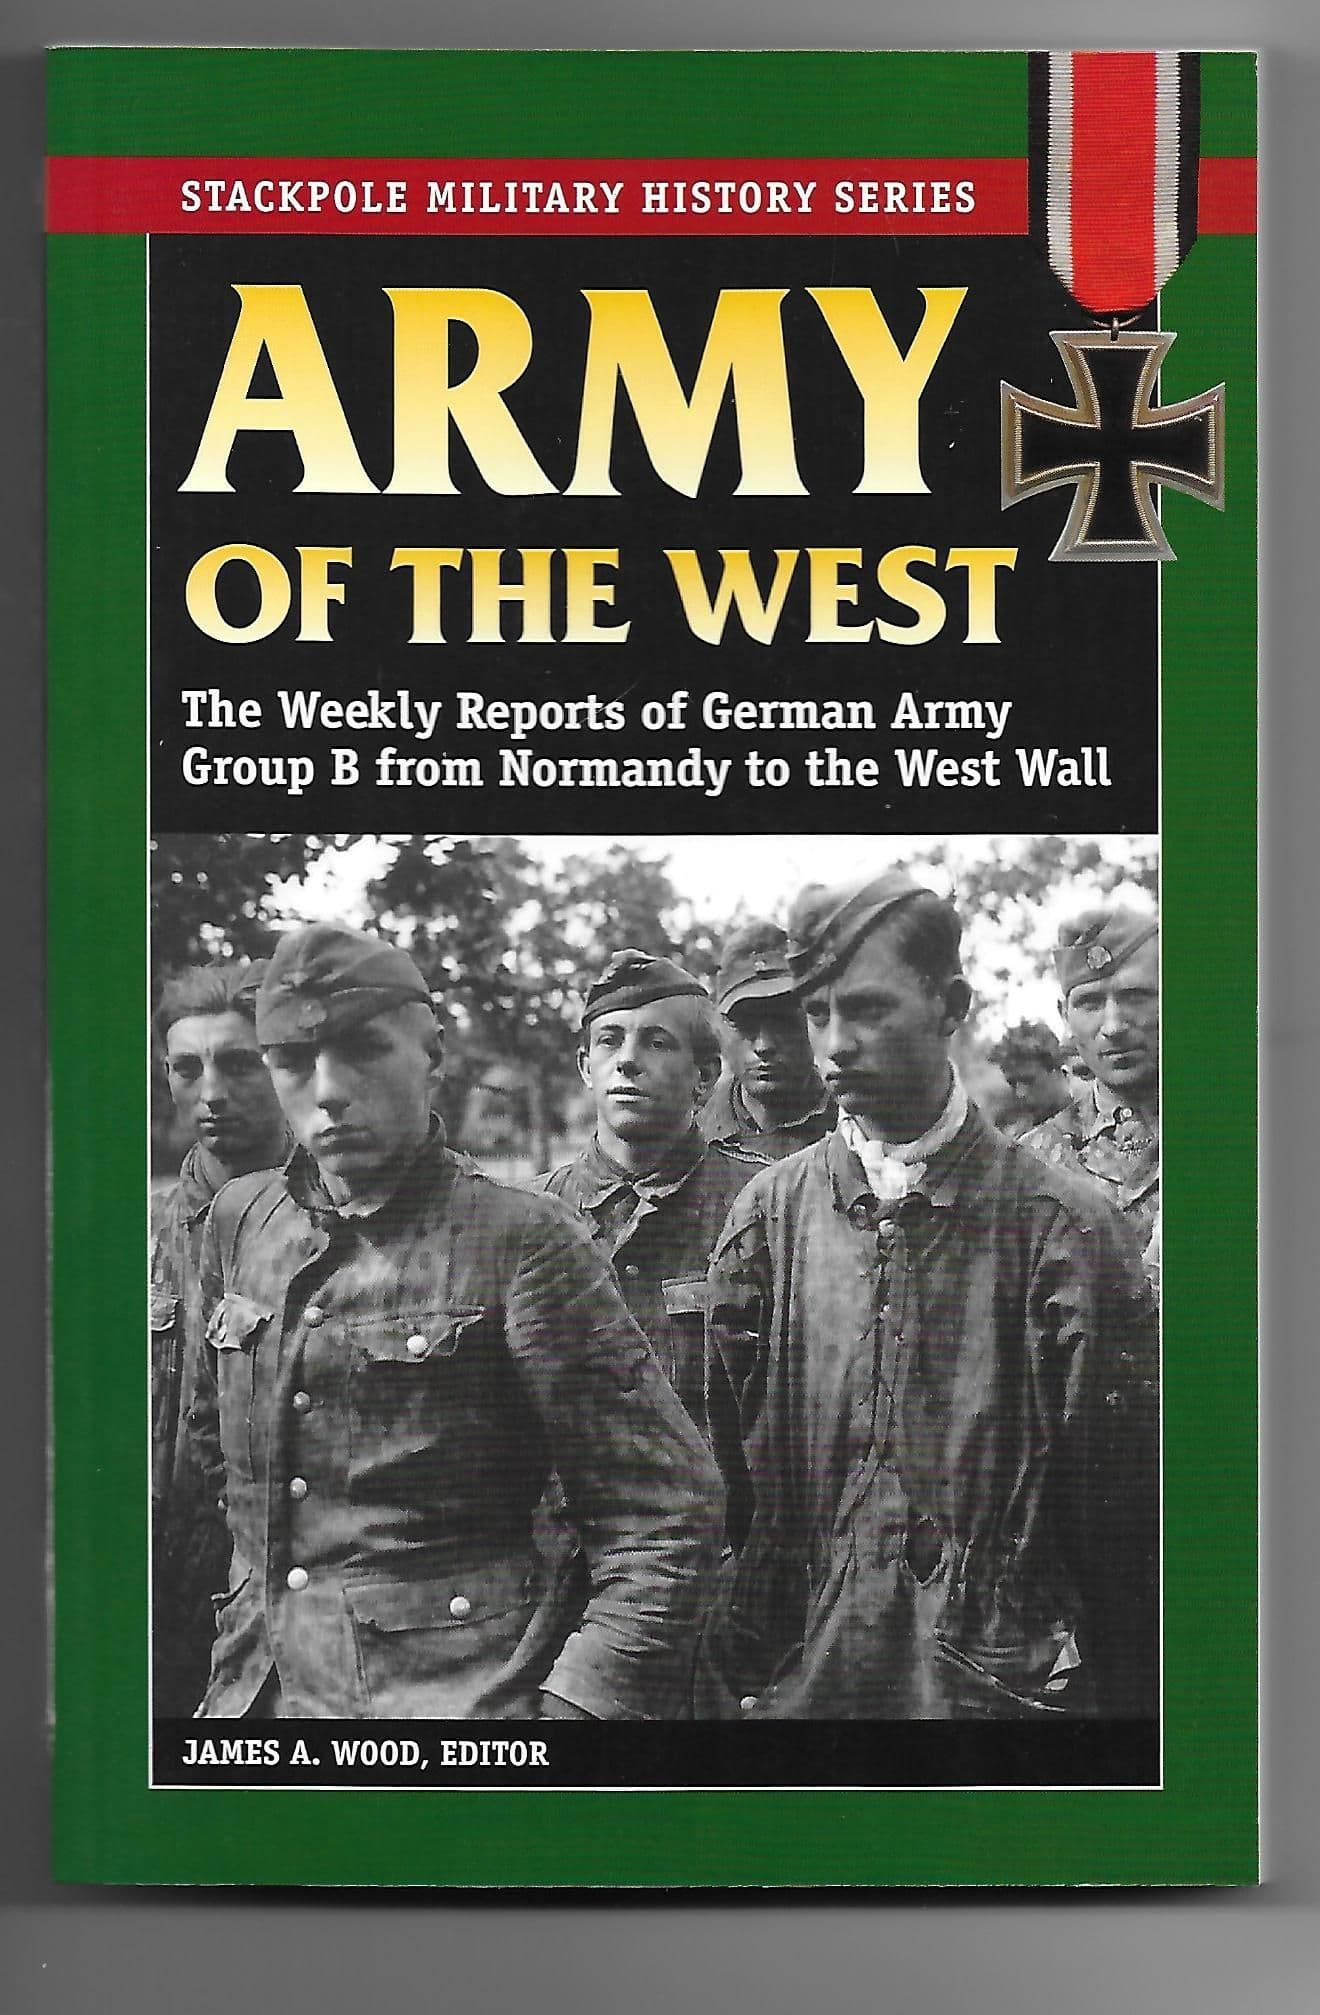 Stackpole: Army of the West, The Weekly Reports of German Group B from Normandy to the West Wall